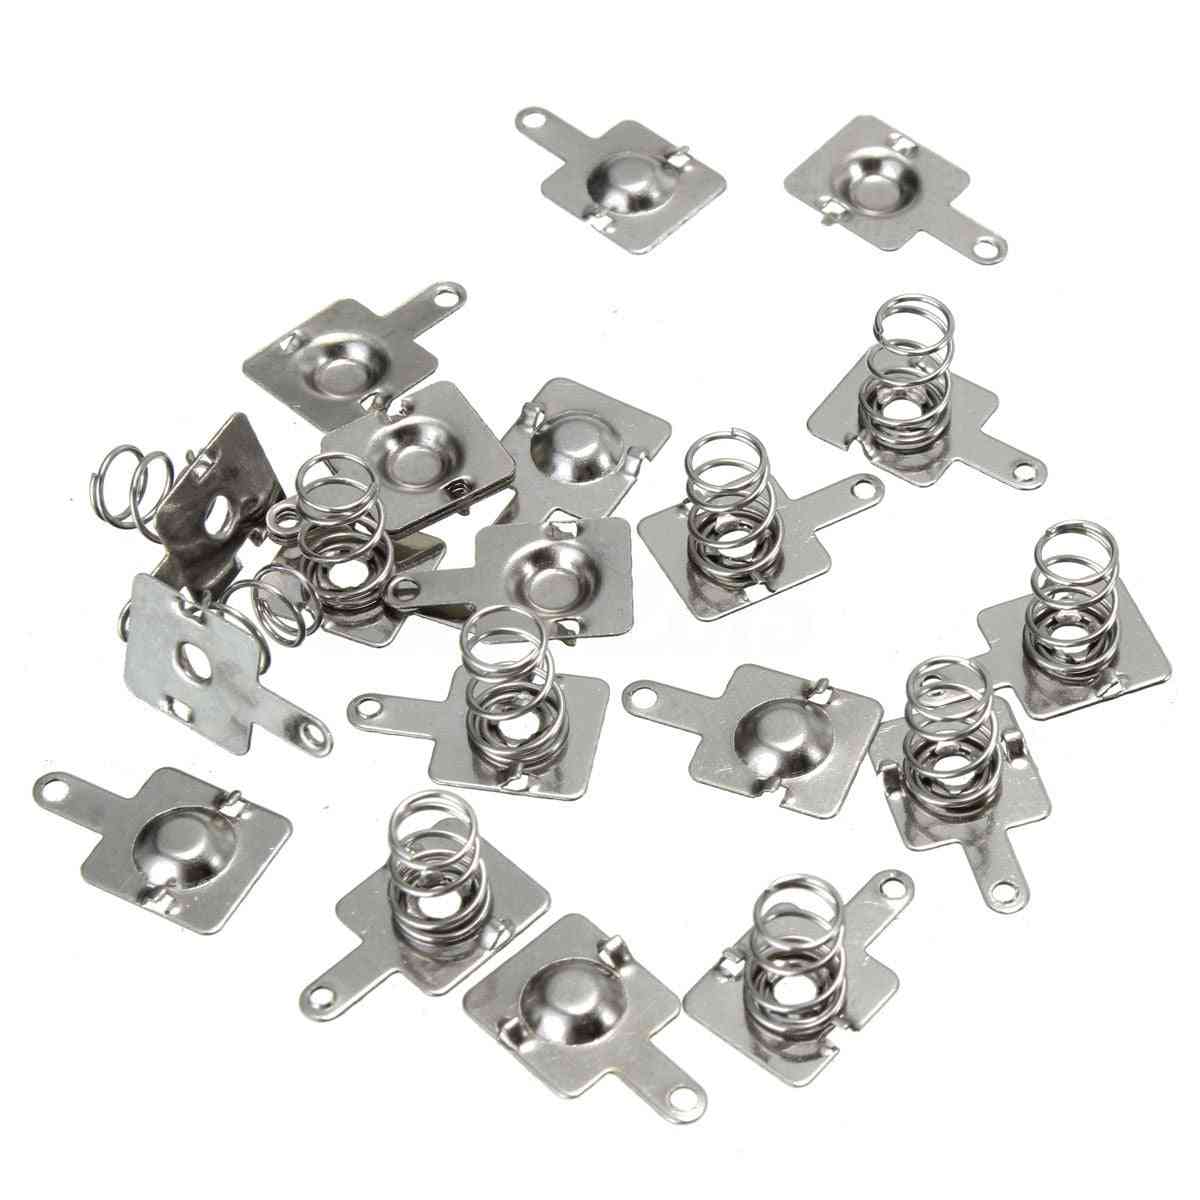 10 Pairs Of Silver Battery Spring Contact -replacement Parts